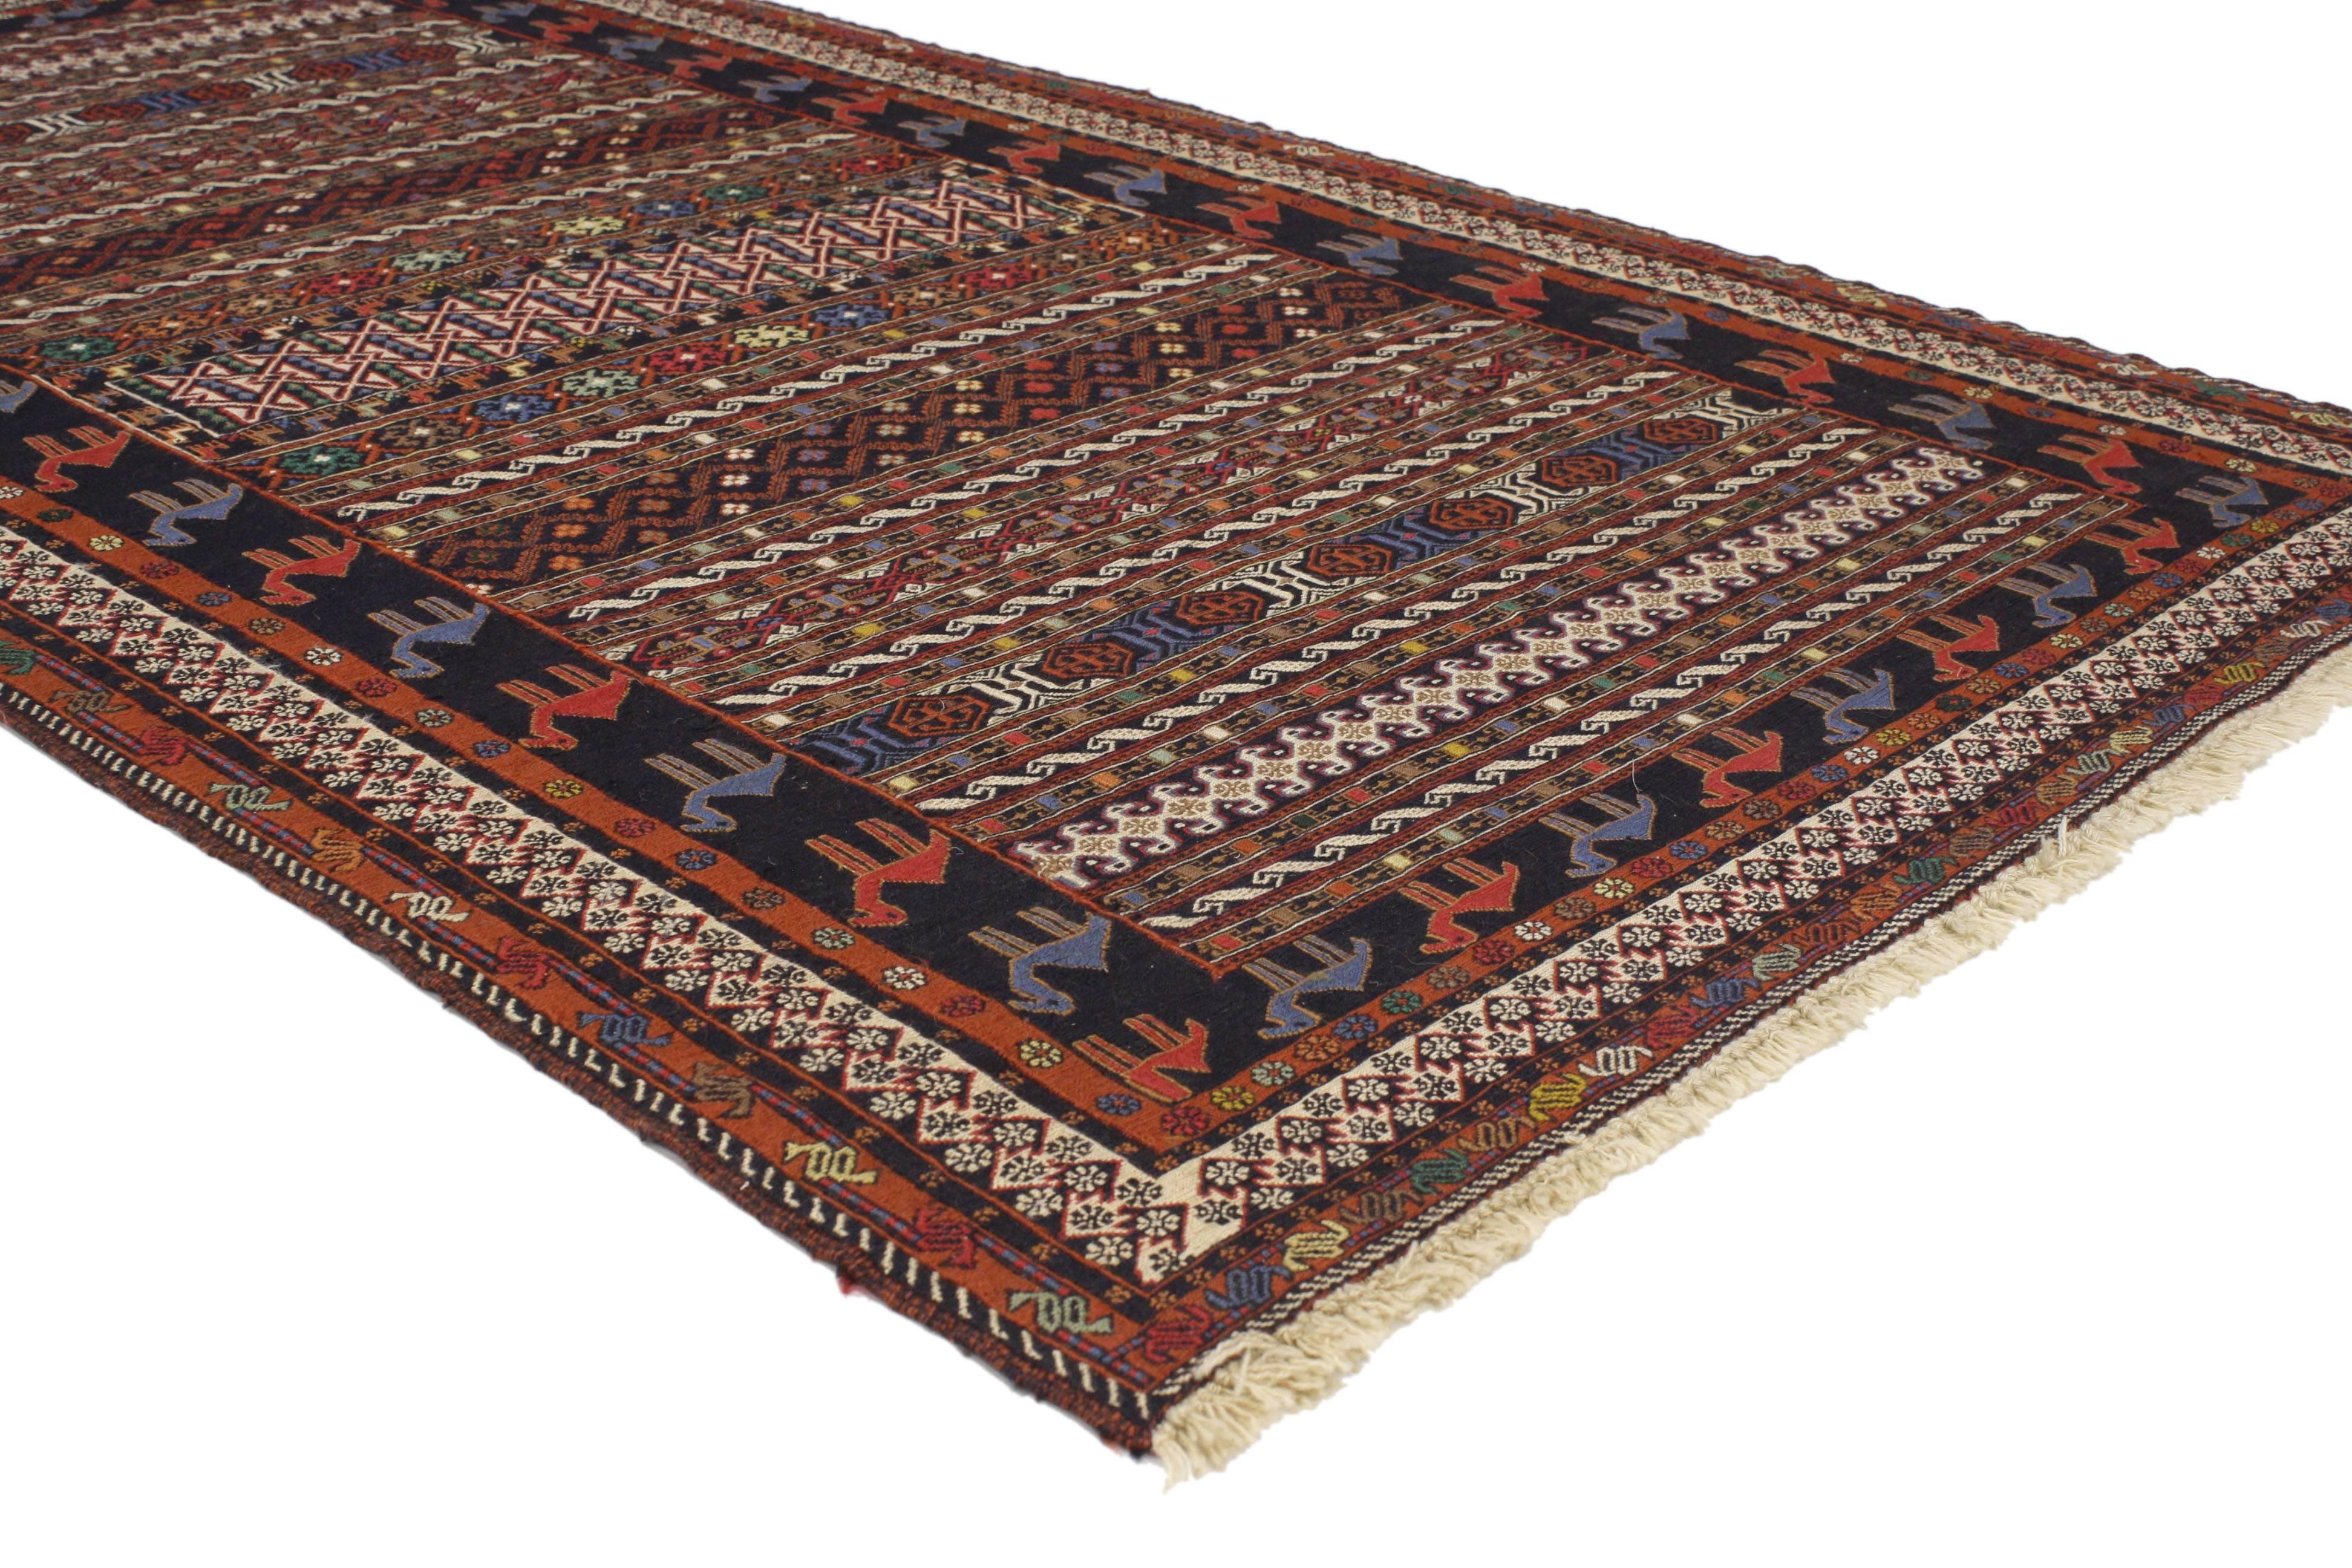 76999 Vintage Soumak Persian Rug With Tribal Style. This hand-woven vintage Persian Soumak rug features a series of horizontal bands composed of ancient symbolic tribal motifs. It is enclosed with a series of guard bands. Perfect for a hallway,